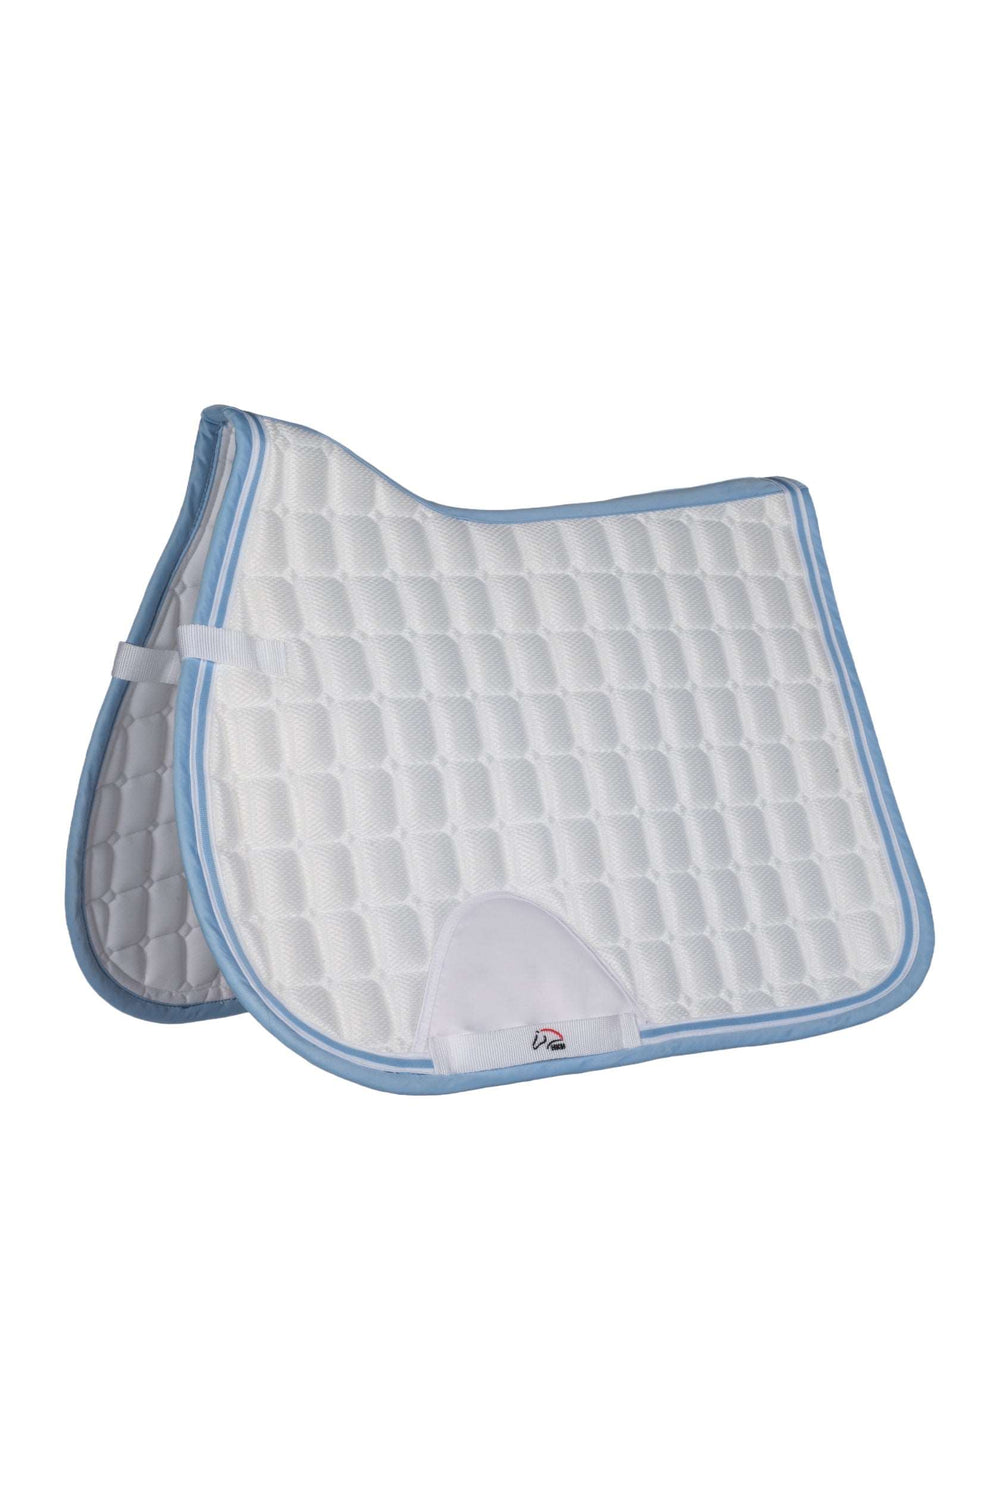 Airy Mesh Breathable Saddle Pad